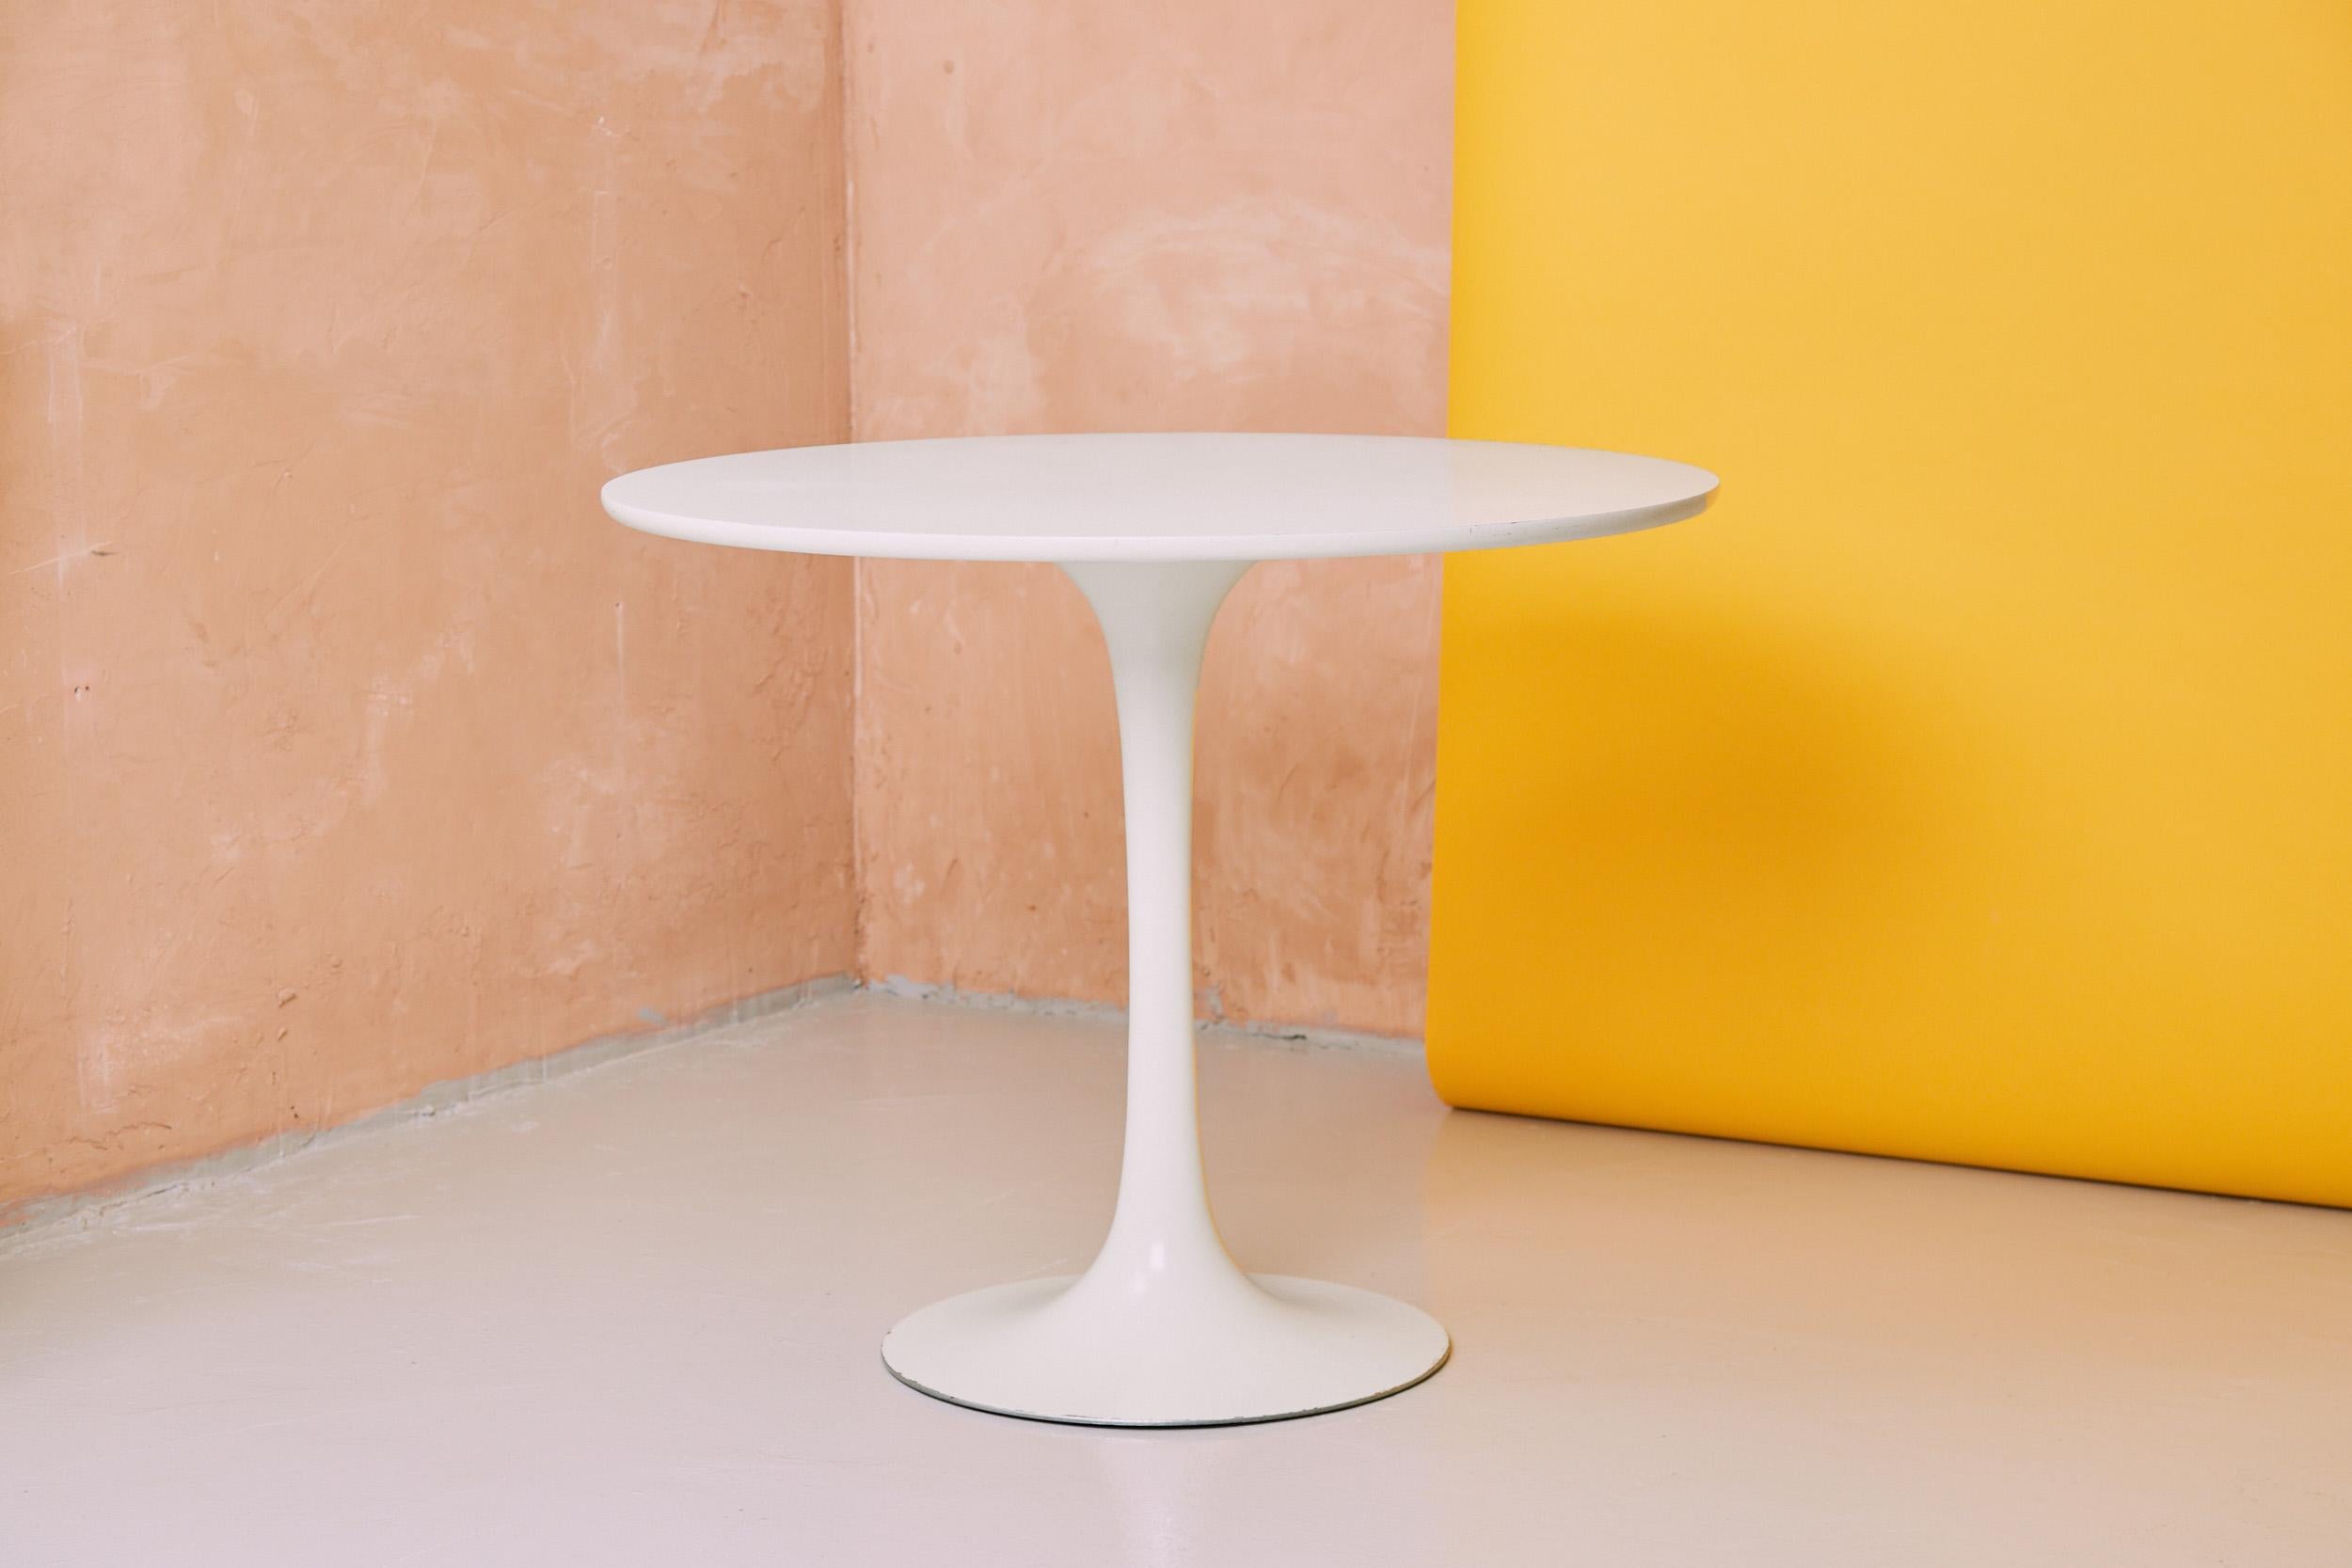 This era defining design by Maurice Burke epitomises the aesthetic of 1960s Britain, but has remained popular to this day, transcending decades of interior trends. The design is based on Eero Saarinen's Pedestal Group range of furniture produced for